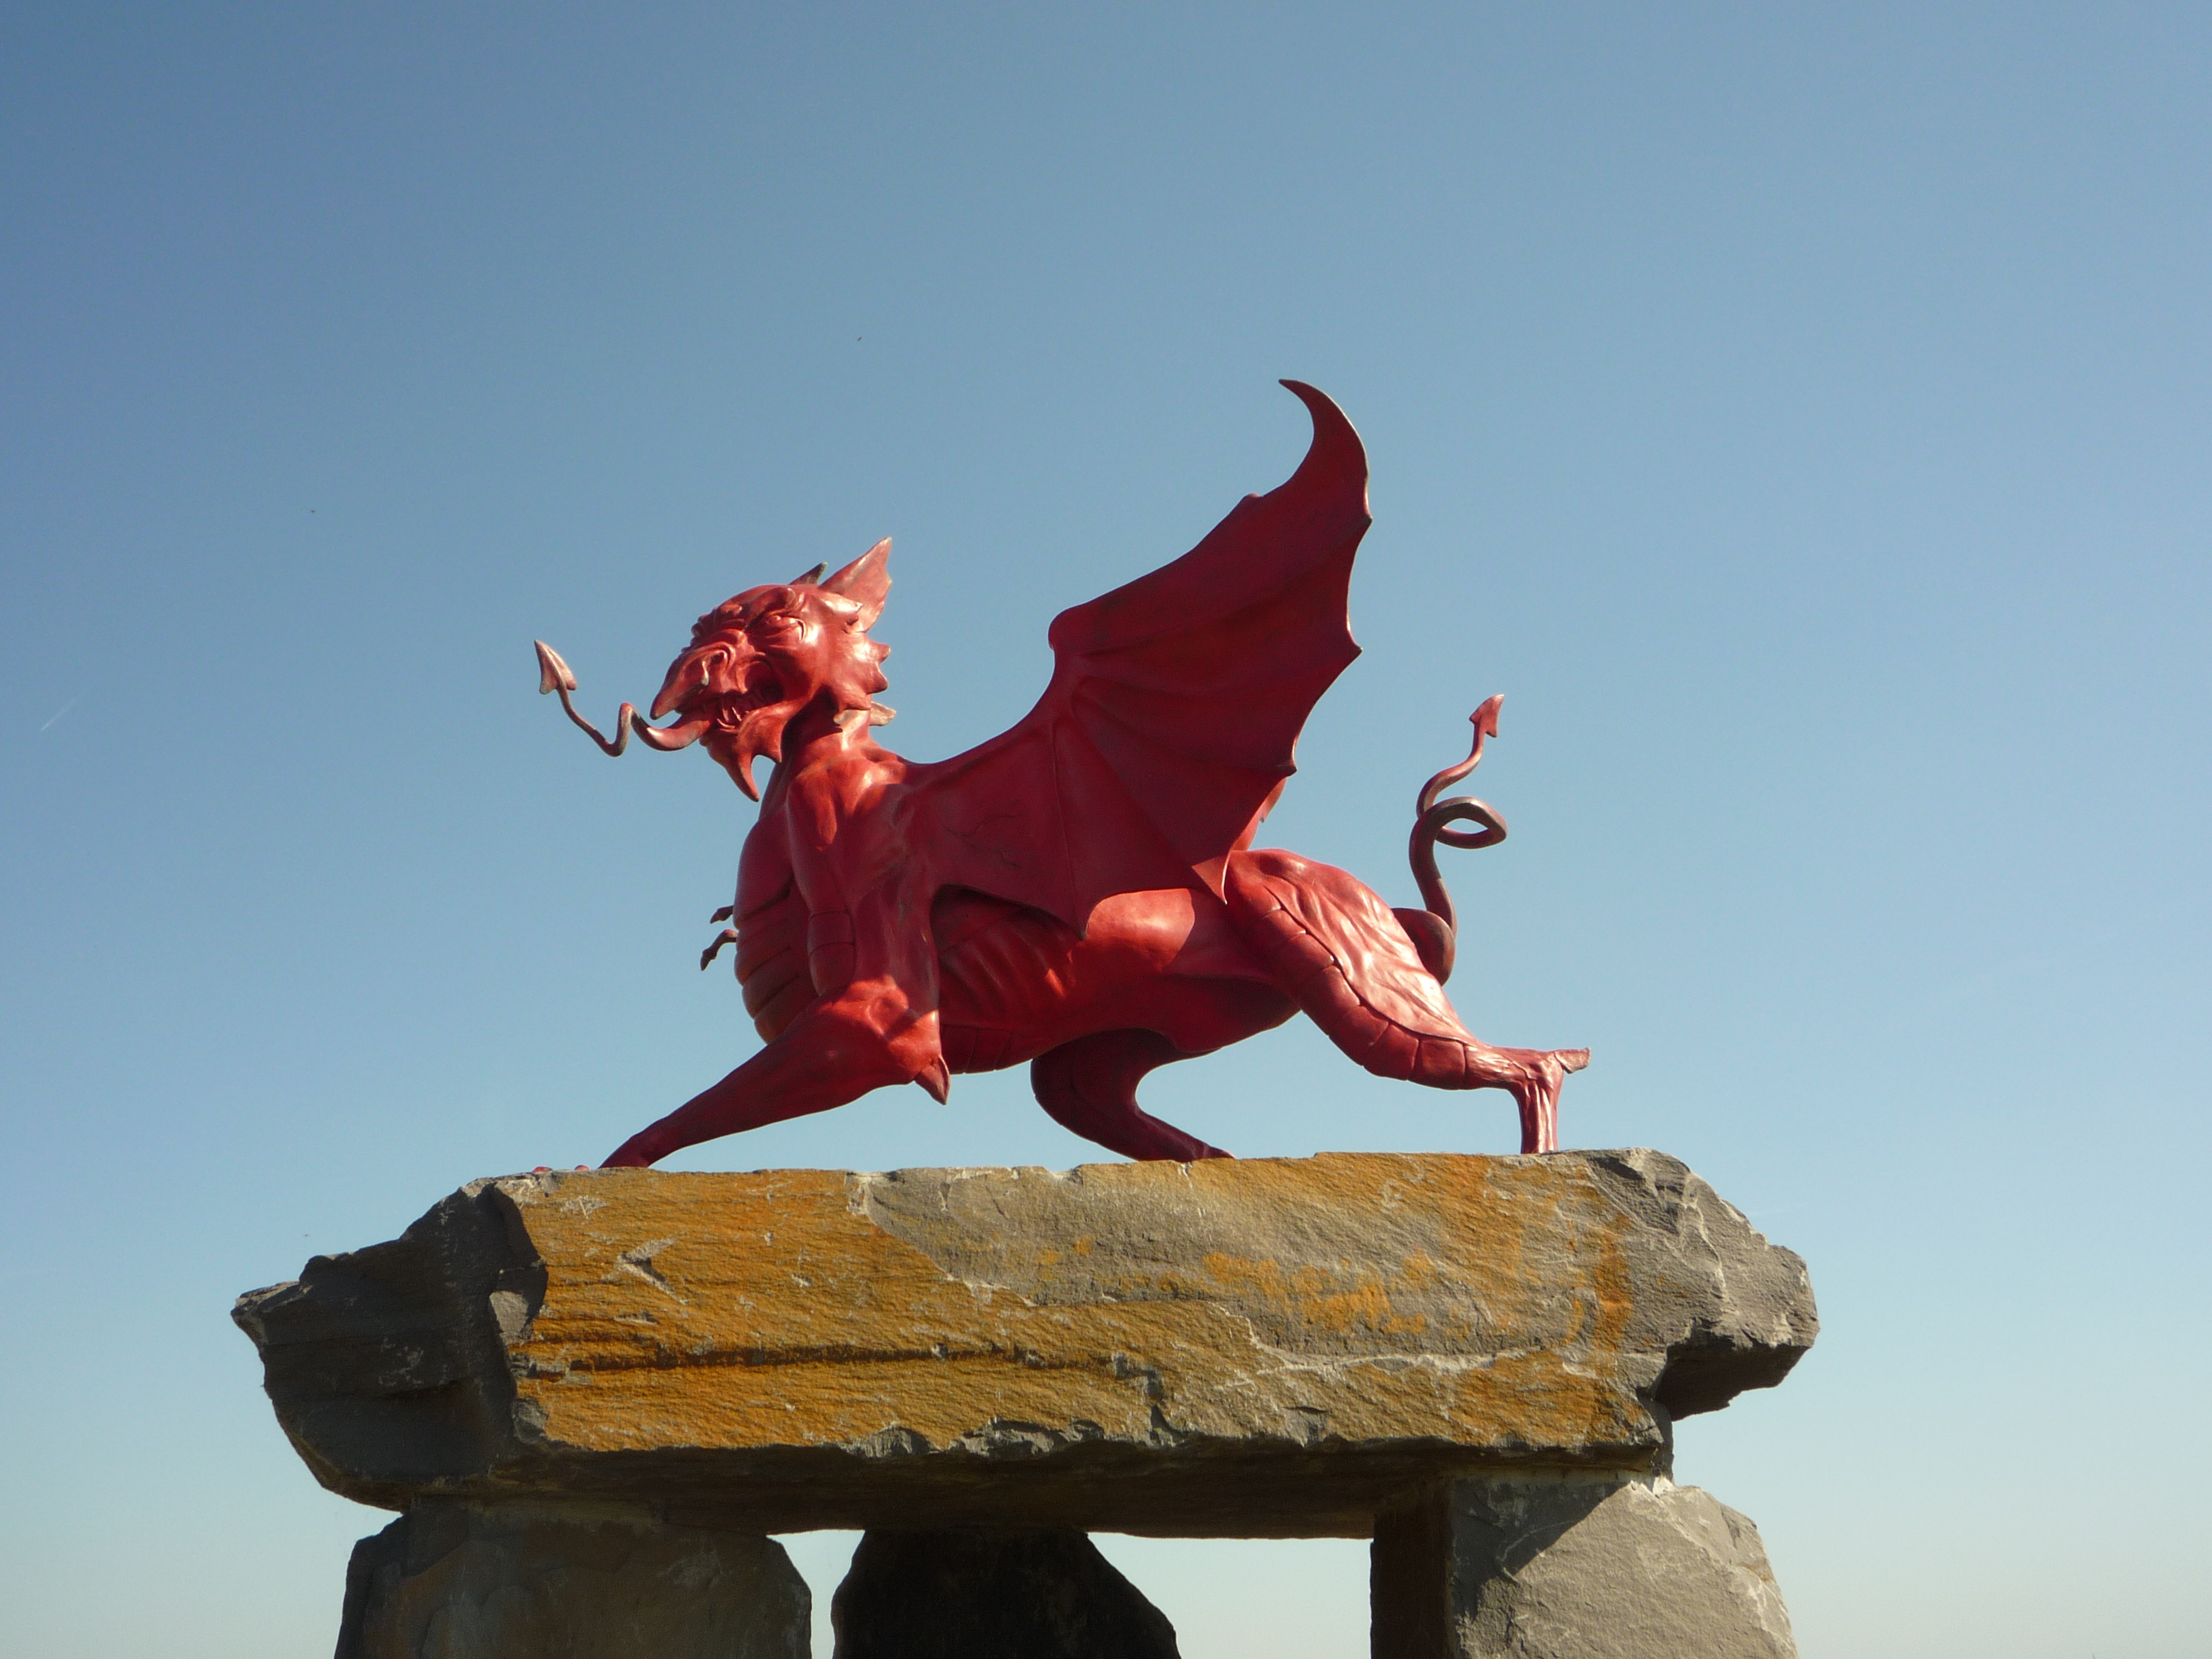 File:Red Dragon sculpture, National Memorial Ypres.jpg - Wikimedia Commons